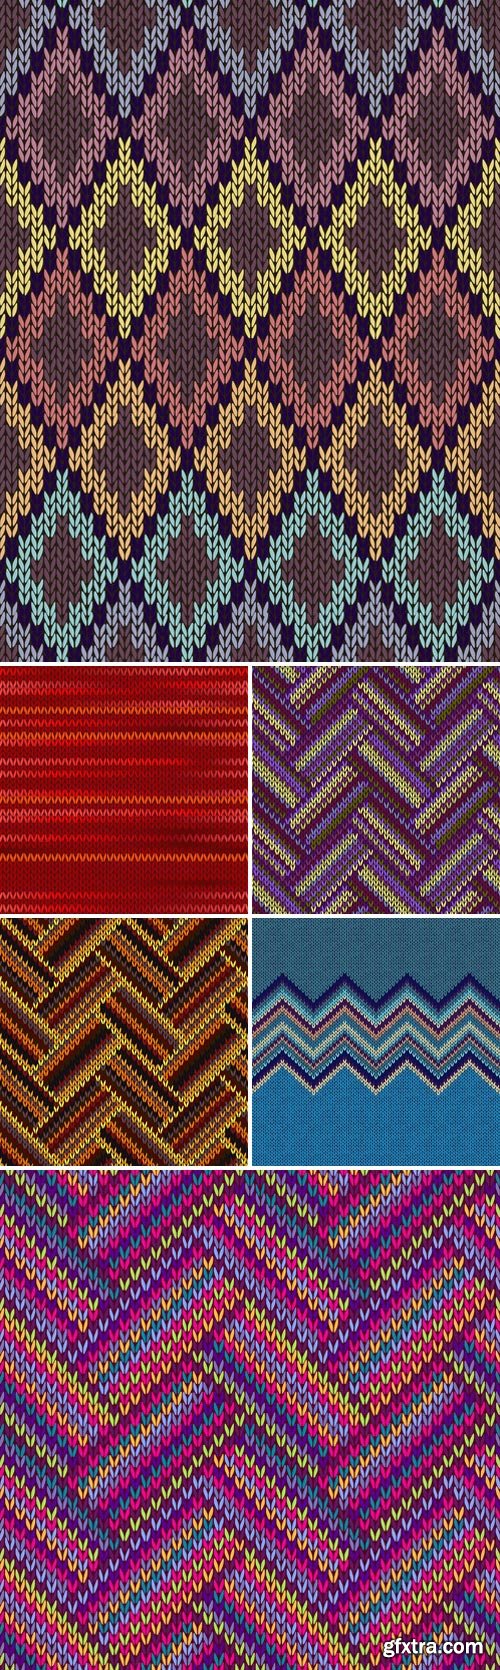 Stock Vectors - Multicolored Seamless Knitted Pattern